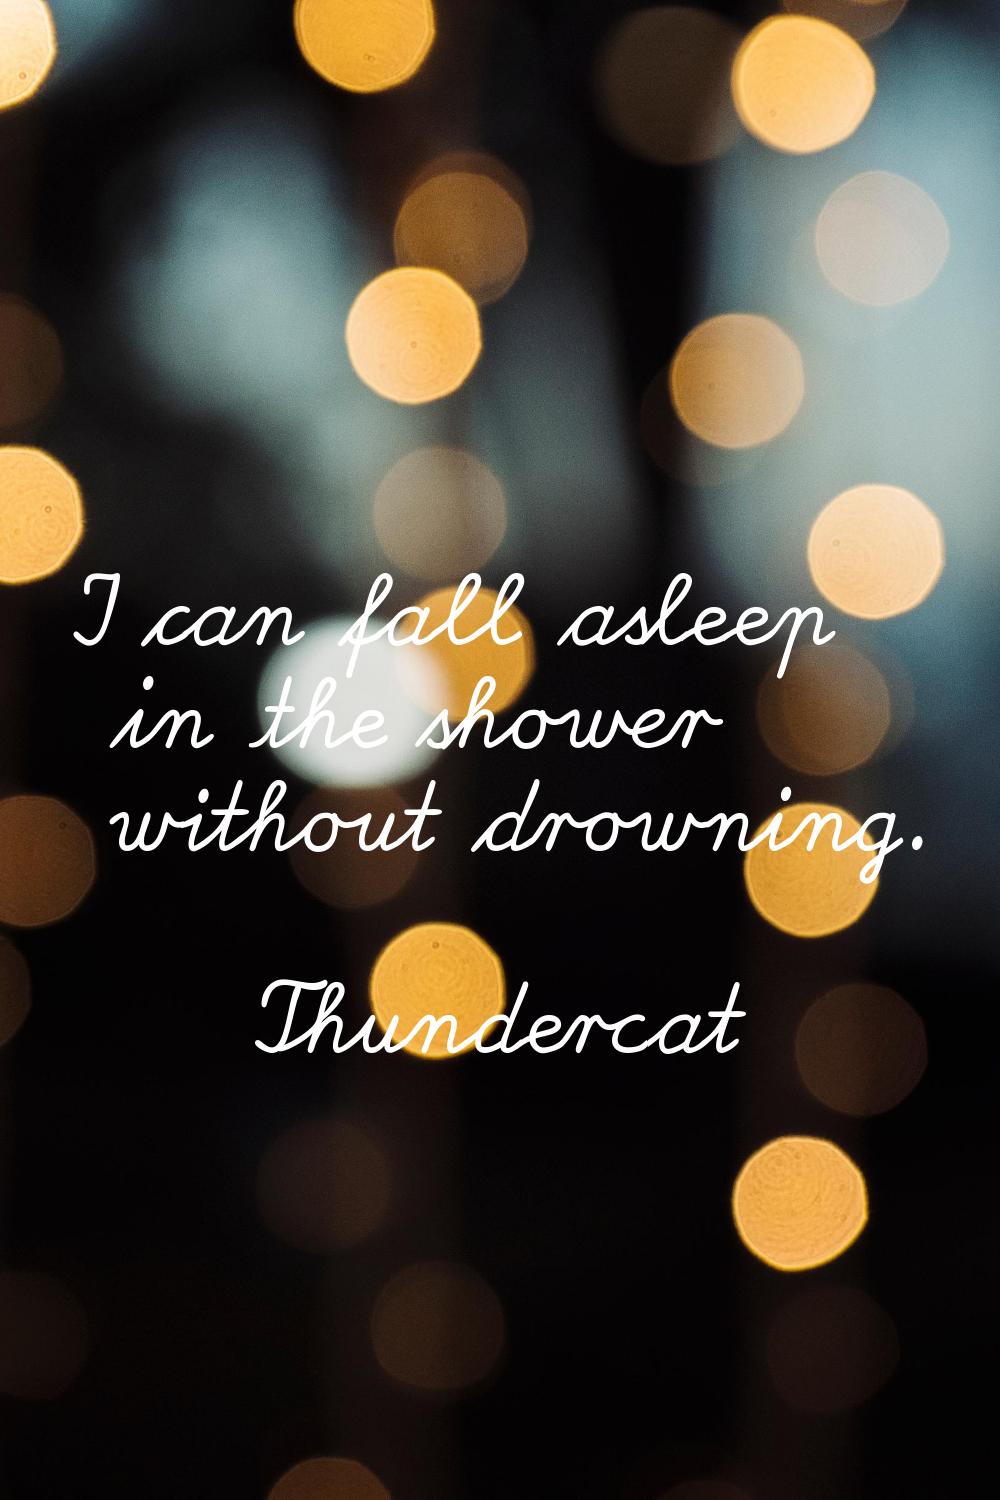 I can fall asleep in the shower without drowning.